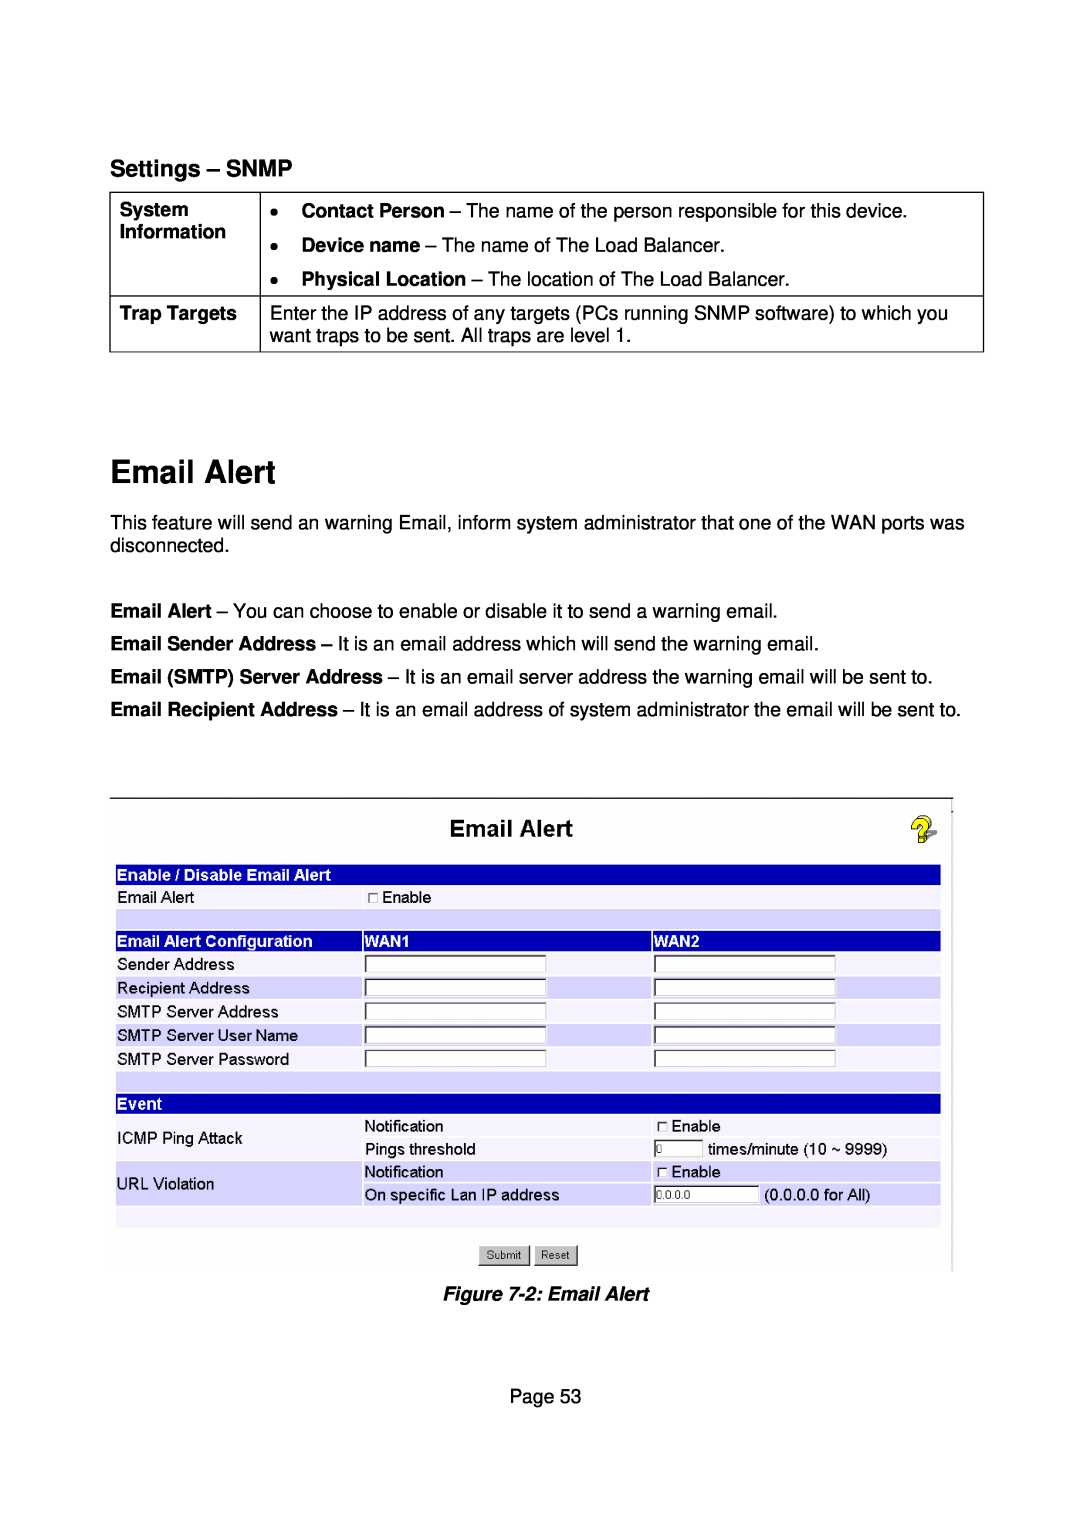 Edimax Technology Edimax user guide Router manual Settings - SNMP, Information, Trap Targets, 2 Email Alert, System 